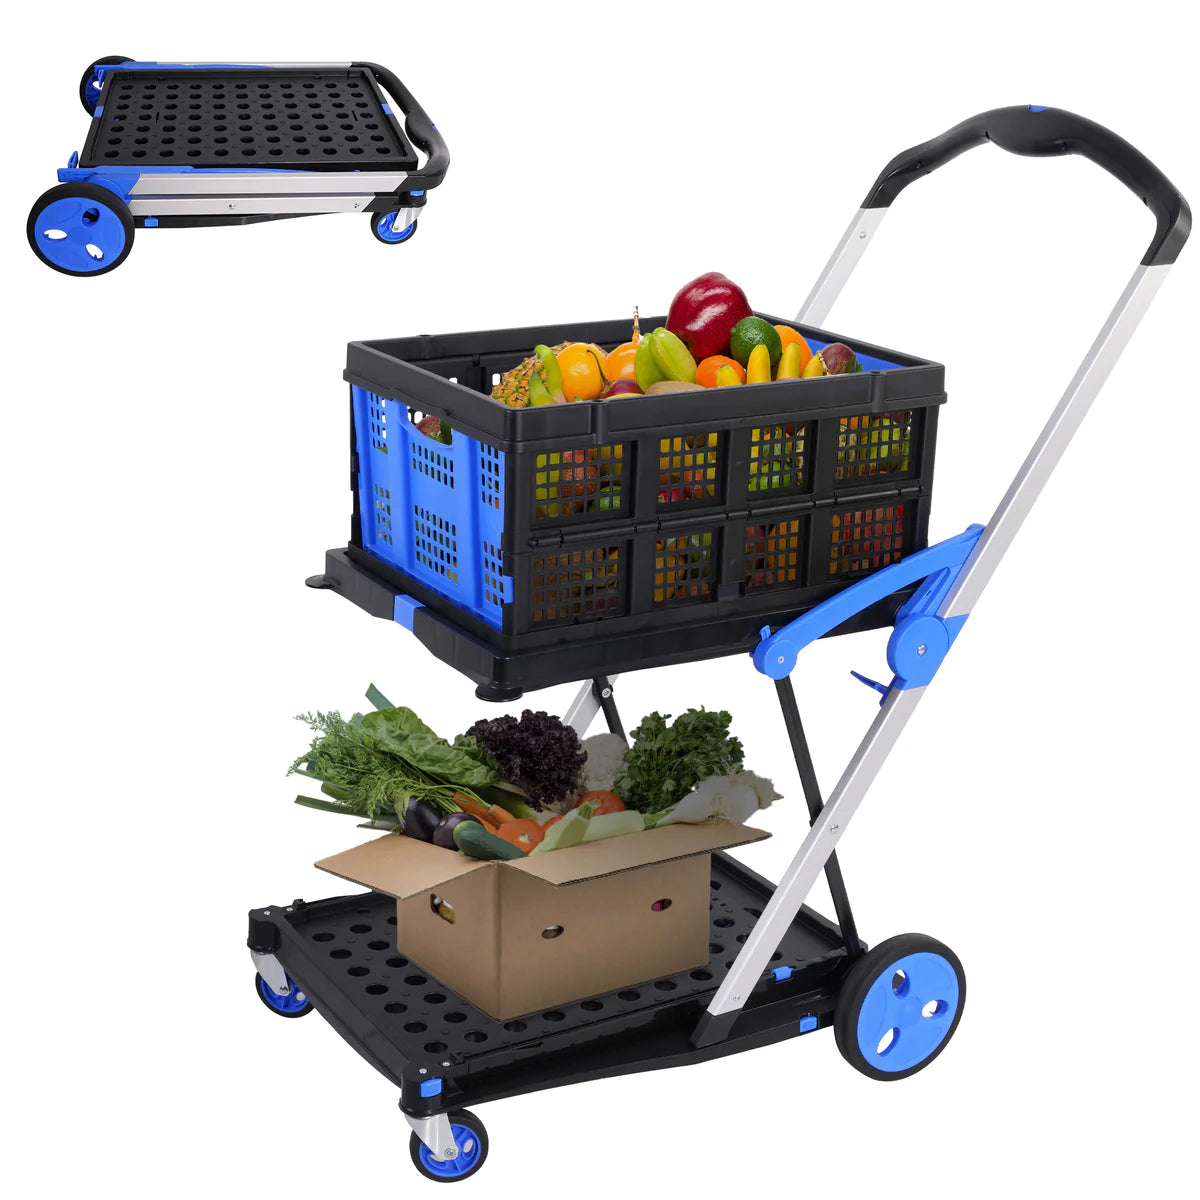 Double deck Multi-Functional Collapsible Carts Foldable Trolley with Storage Crate Rolling Swivel Wheels